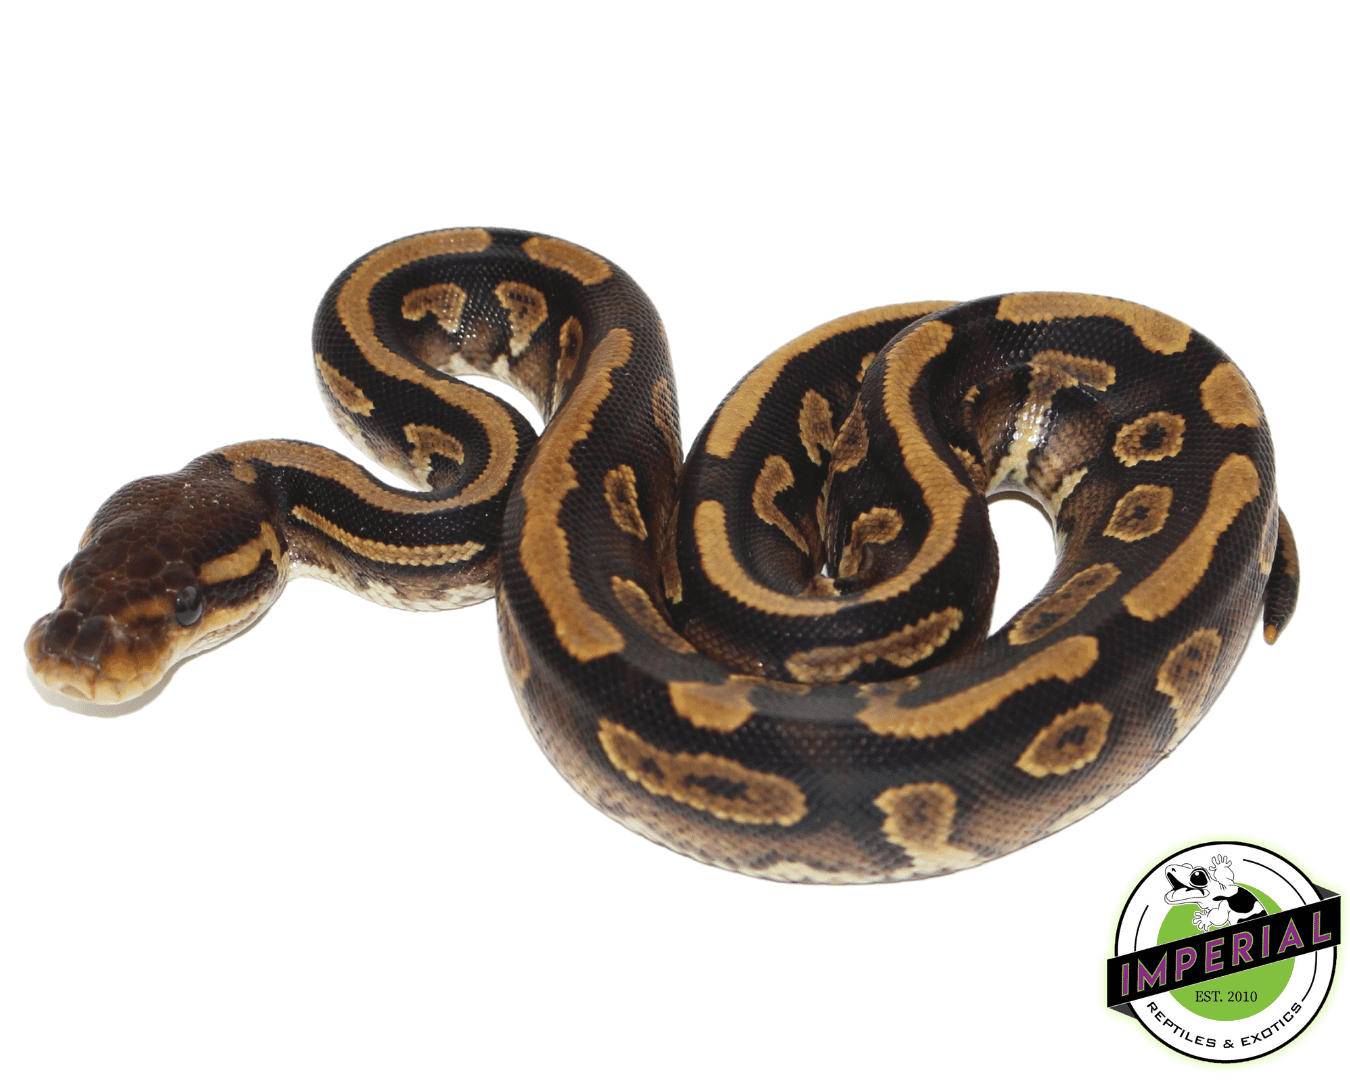 Blackhead Yellowbelly ball python for sale, buy reptiles online